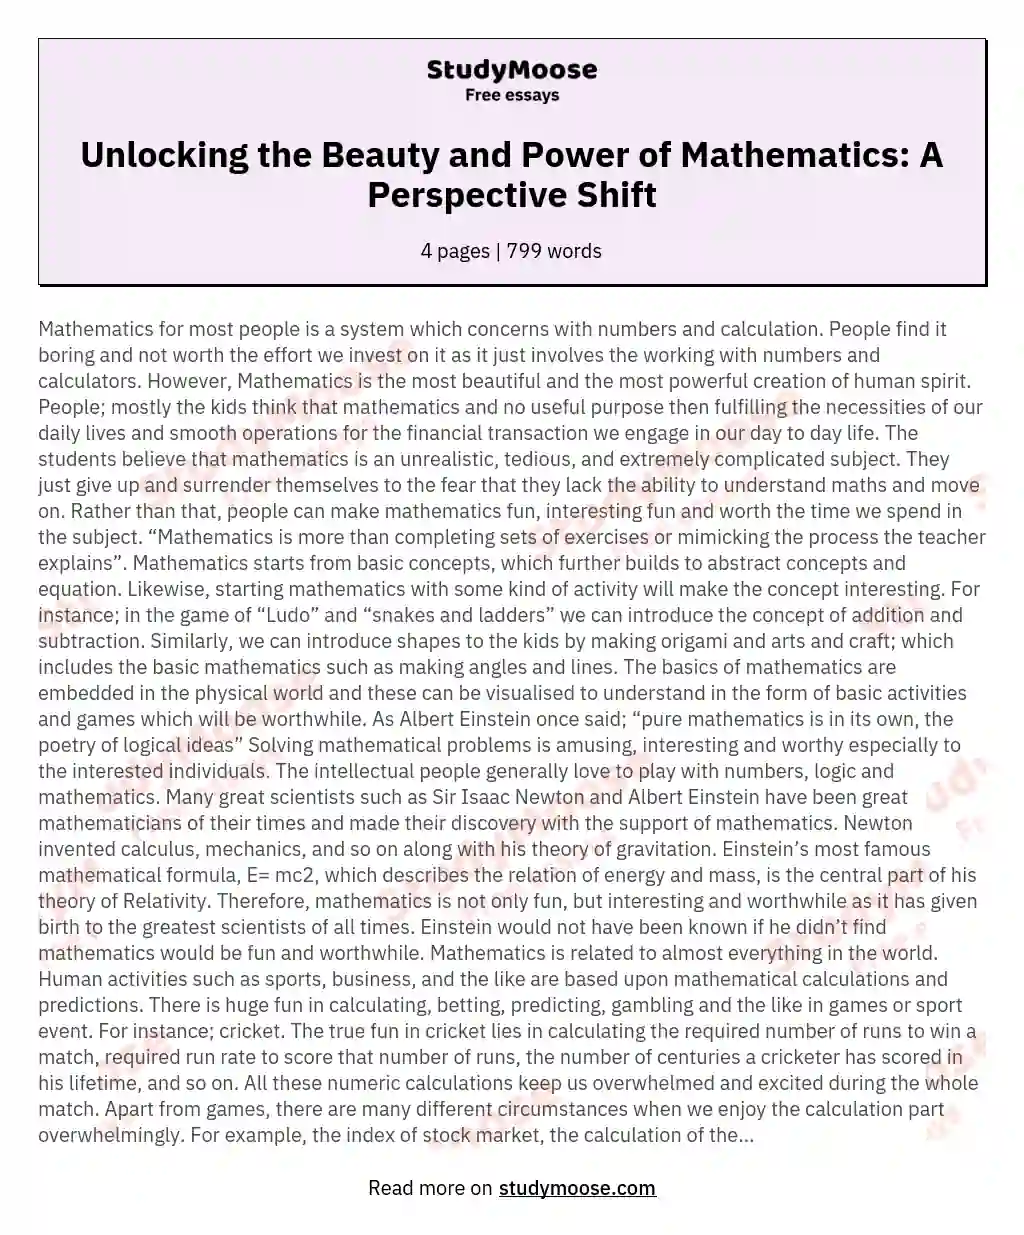 Unlocking the Beauty and Power of Mathematics: A Perspective Shift essay